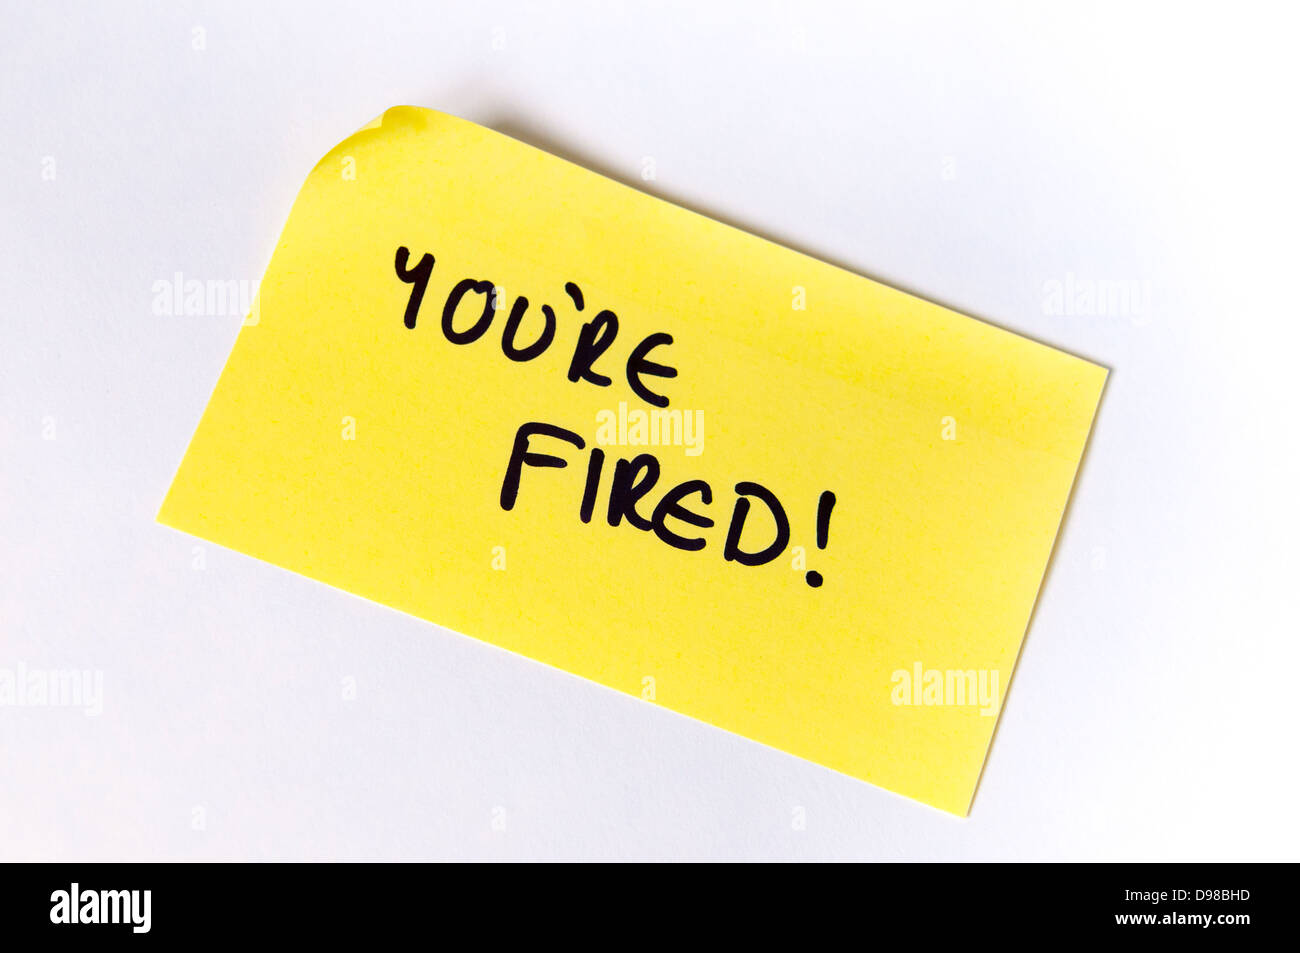 You're Fired! Written on a yellow post it note Stock Photo